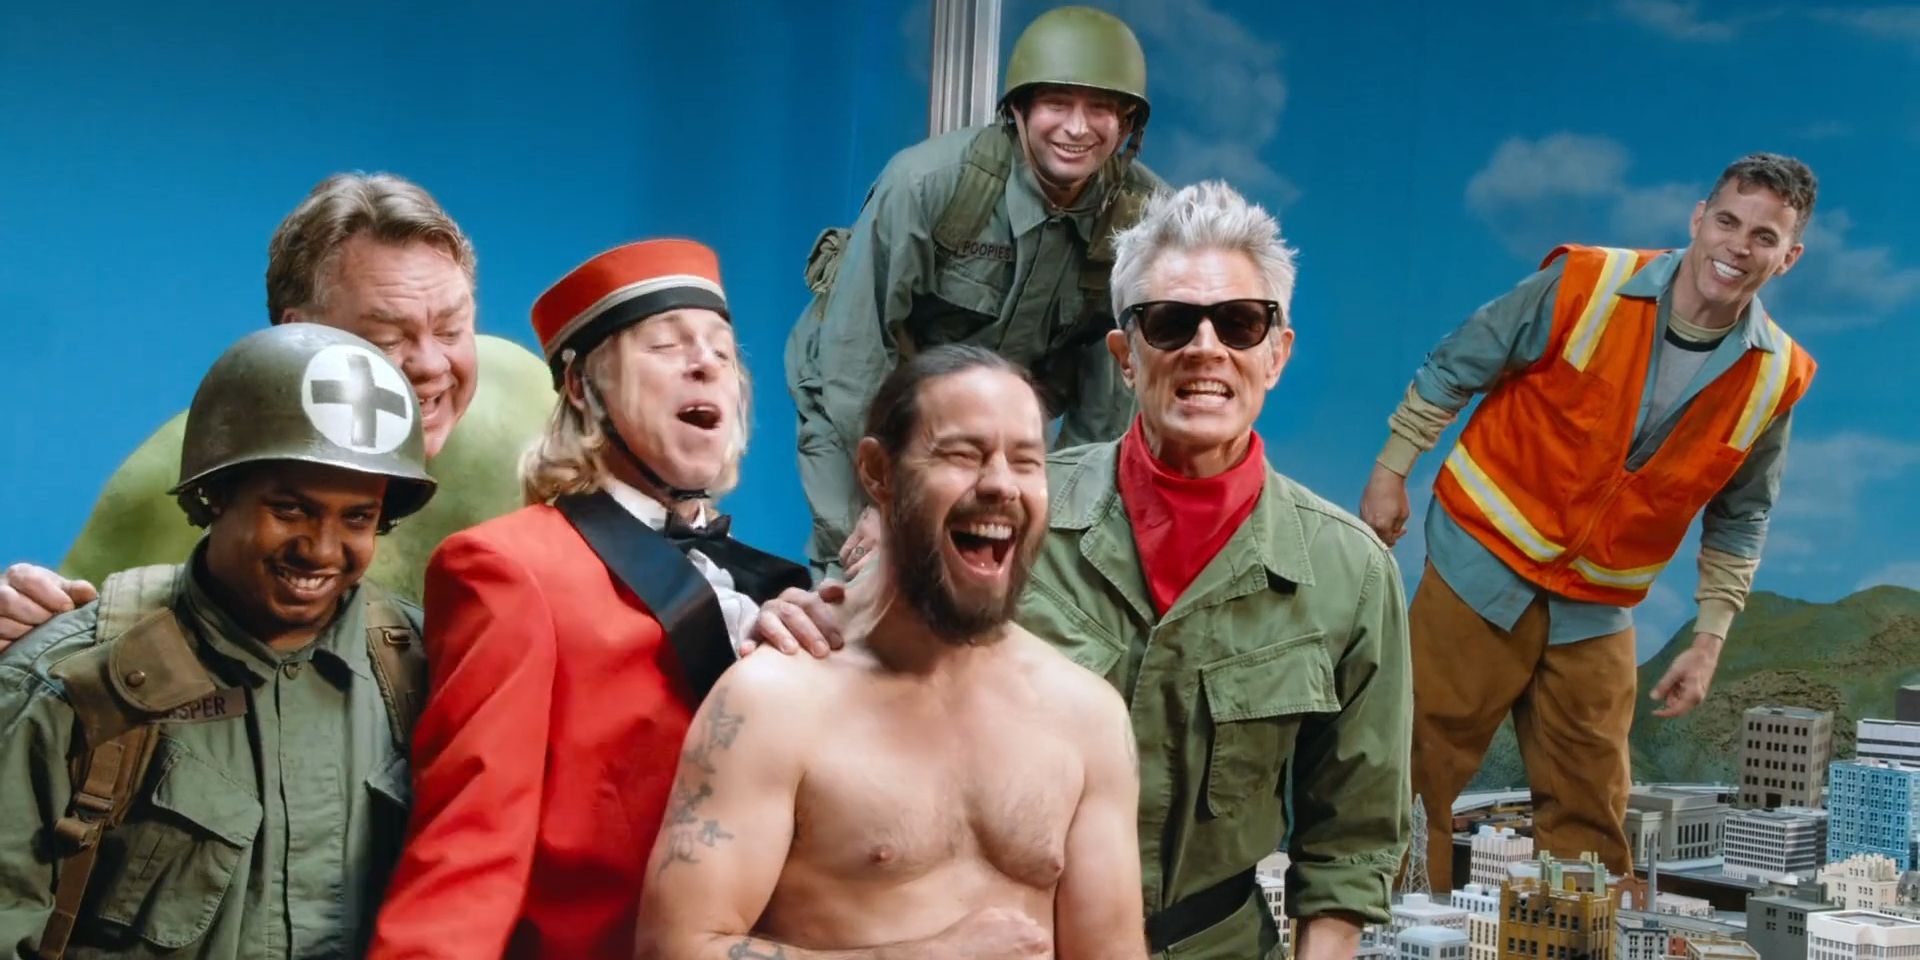 Johnny Knoxville and the Jackass Forever cast